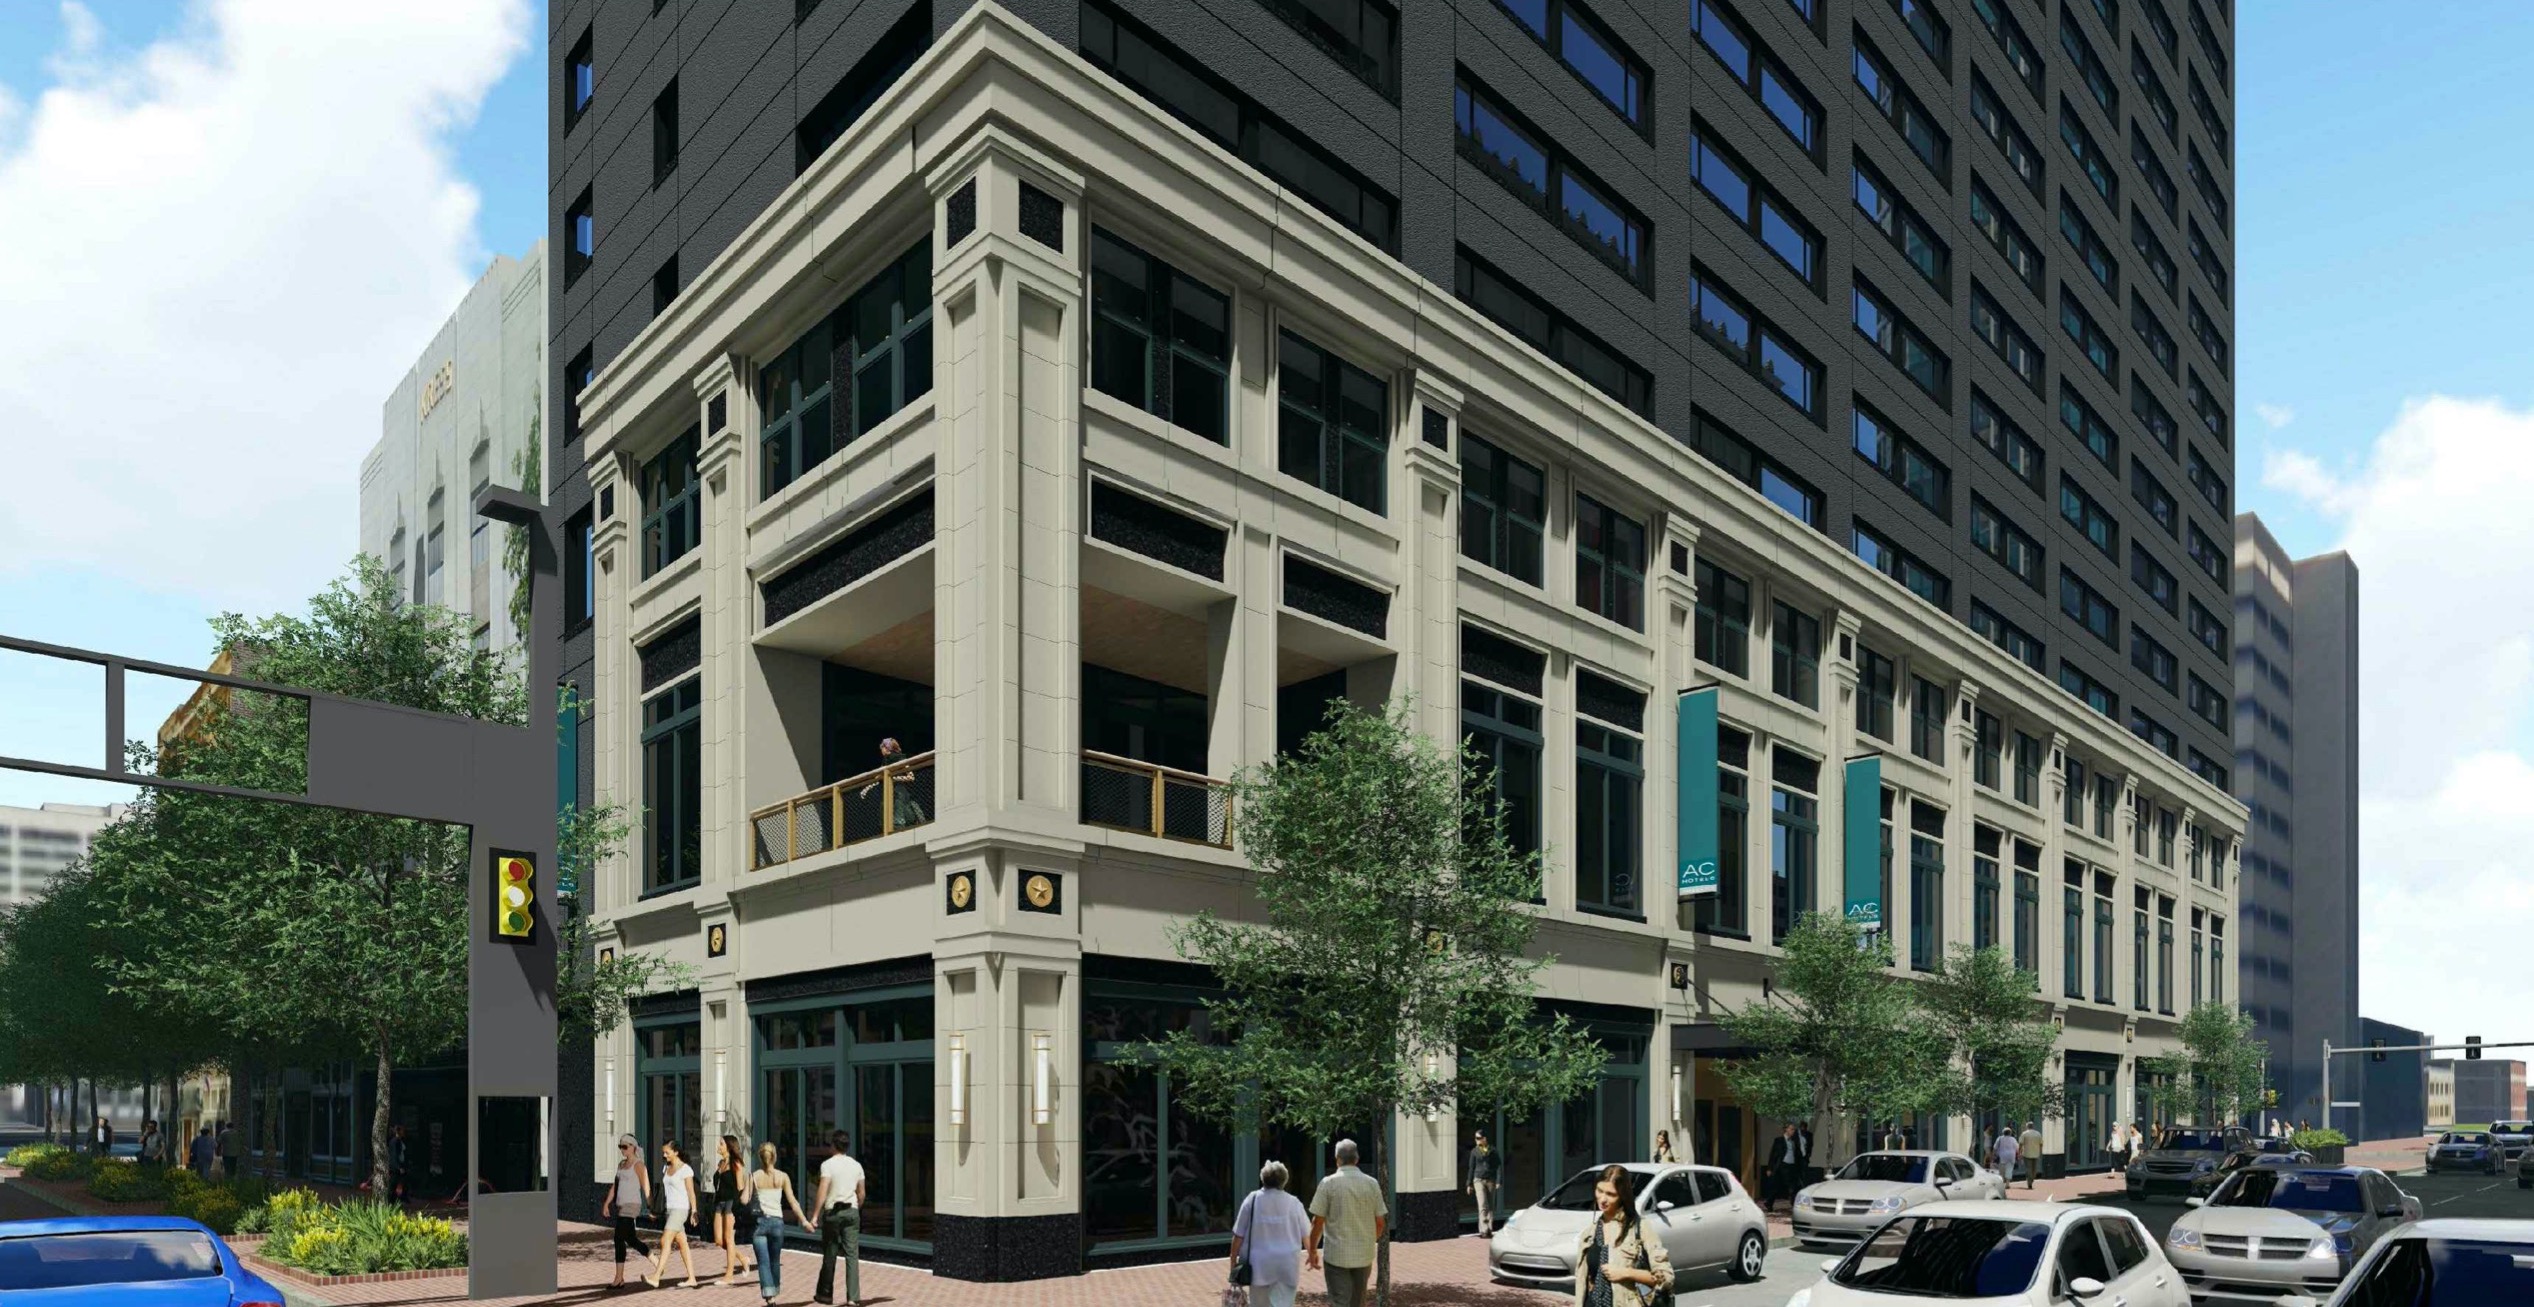 Large GFRC Cladding Panels for Elevations on Three Sides | Project: Marriott Hotel, Downtown Ft. Worth | DMG Masonry | Rendering from Merriman Anderson Architects | Cladding Application using Large GFRC Panels